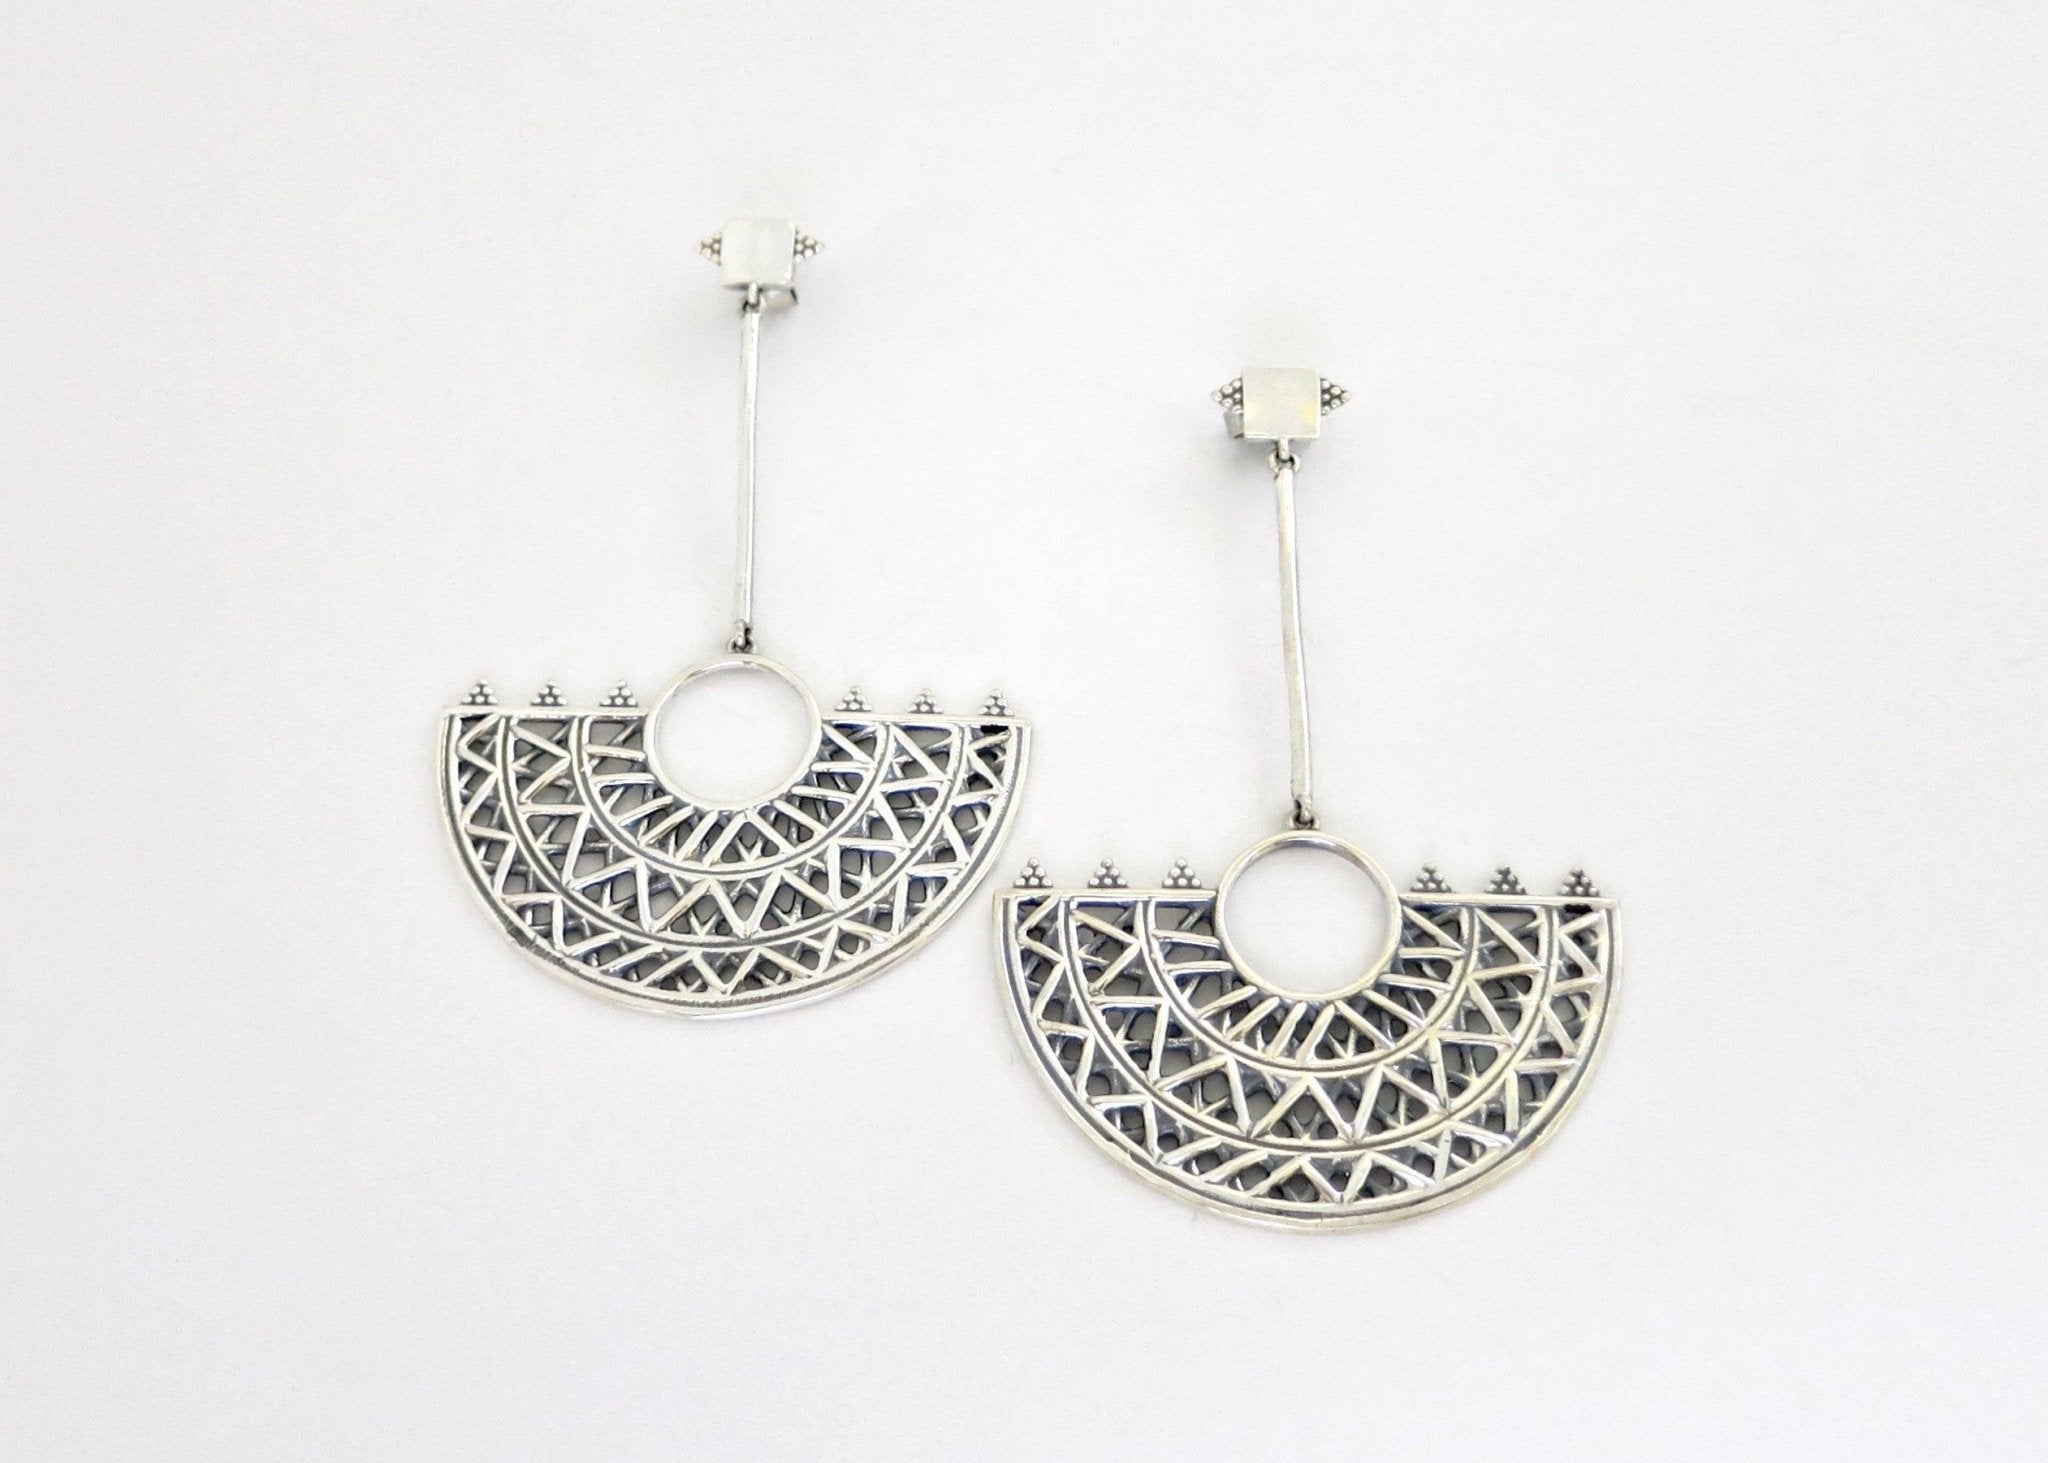 Adah statement earrings with lattice and granulation detailing - Lai